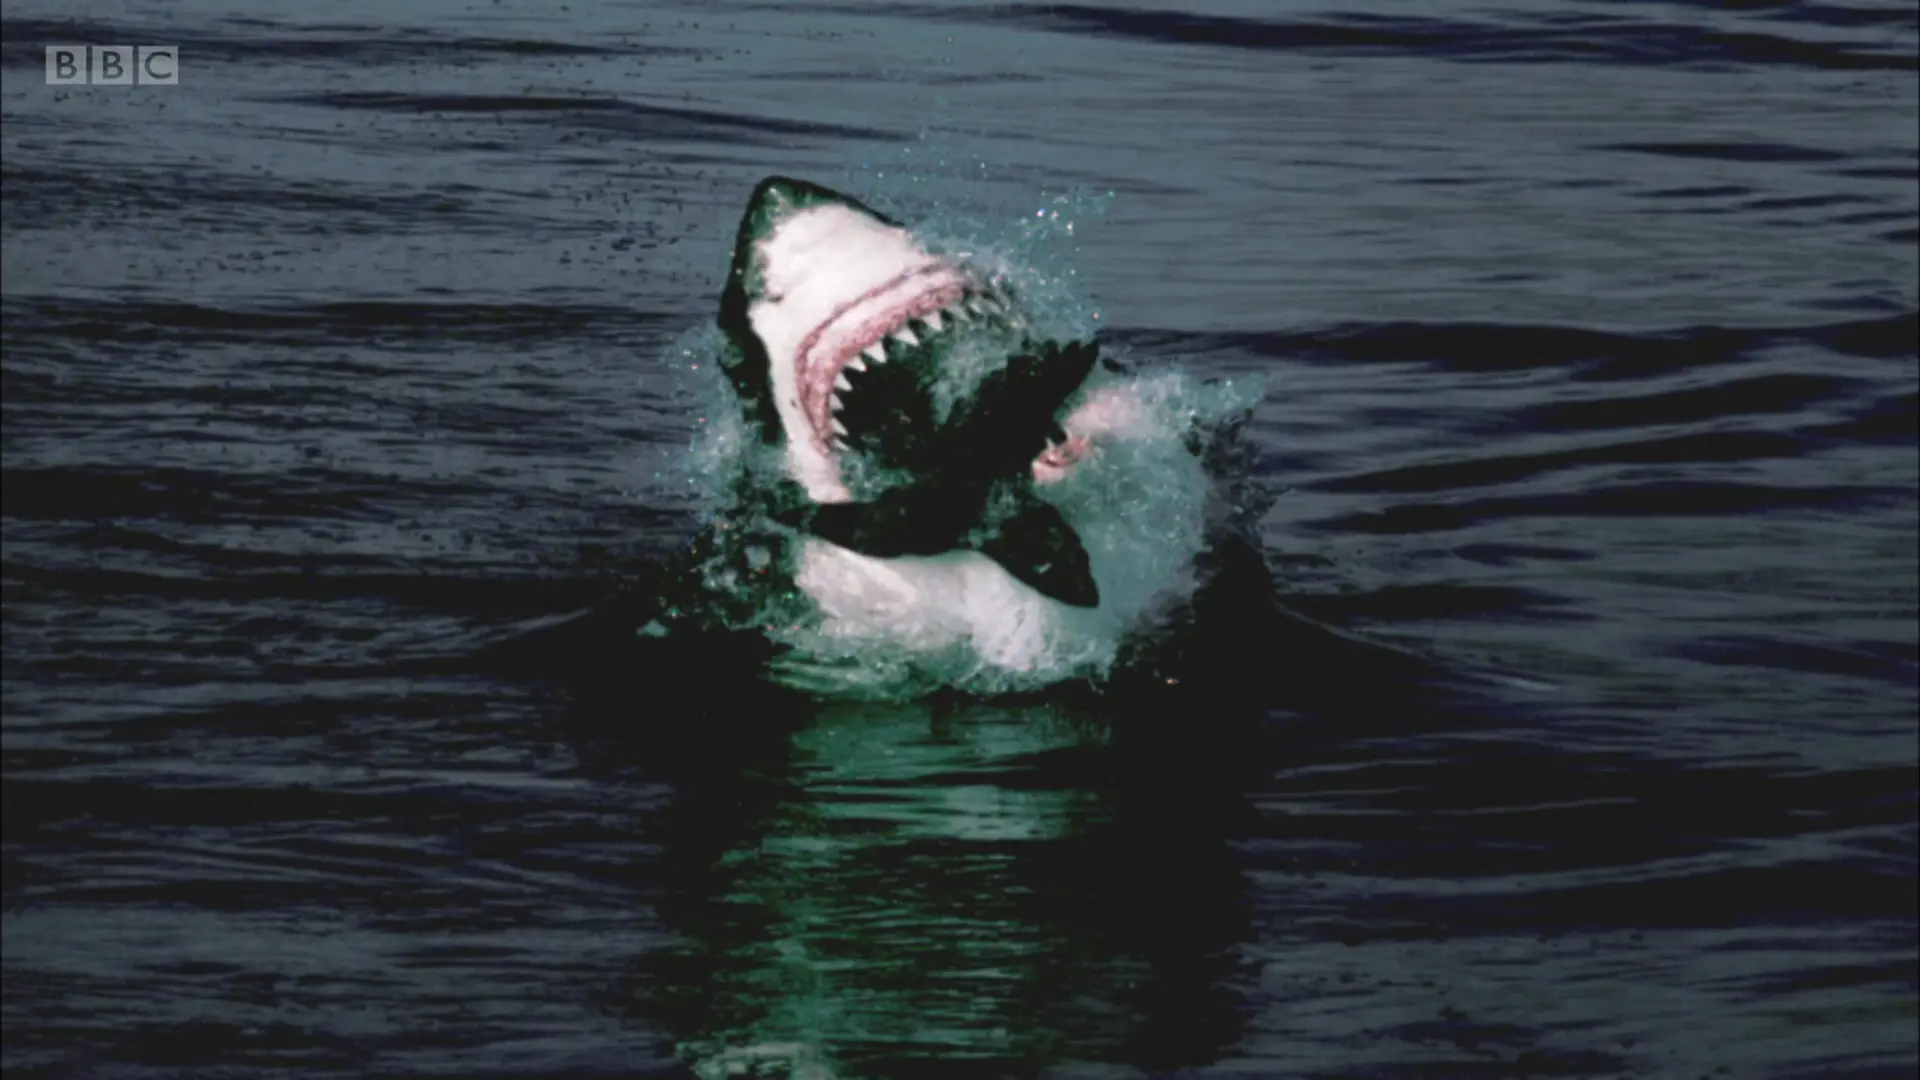 Great white shark (Carcharodon carcharias) as shown in Planet Earth - From Pole to Pole